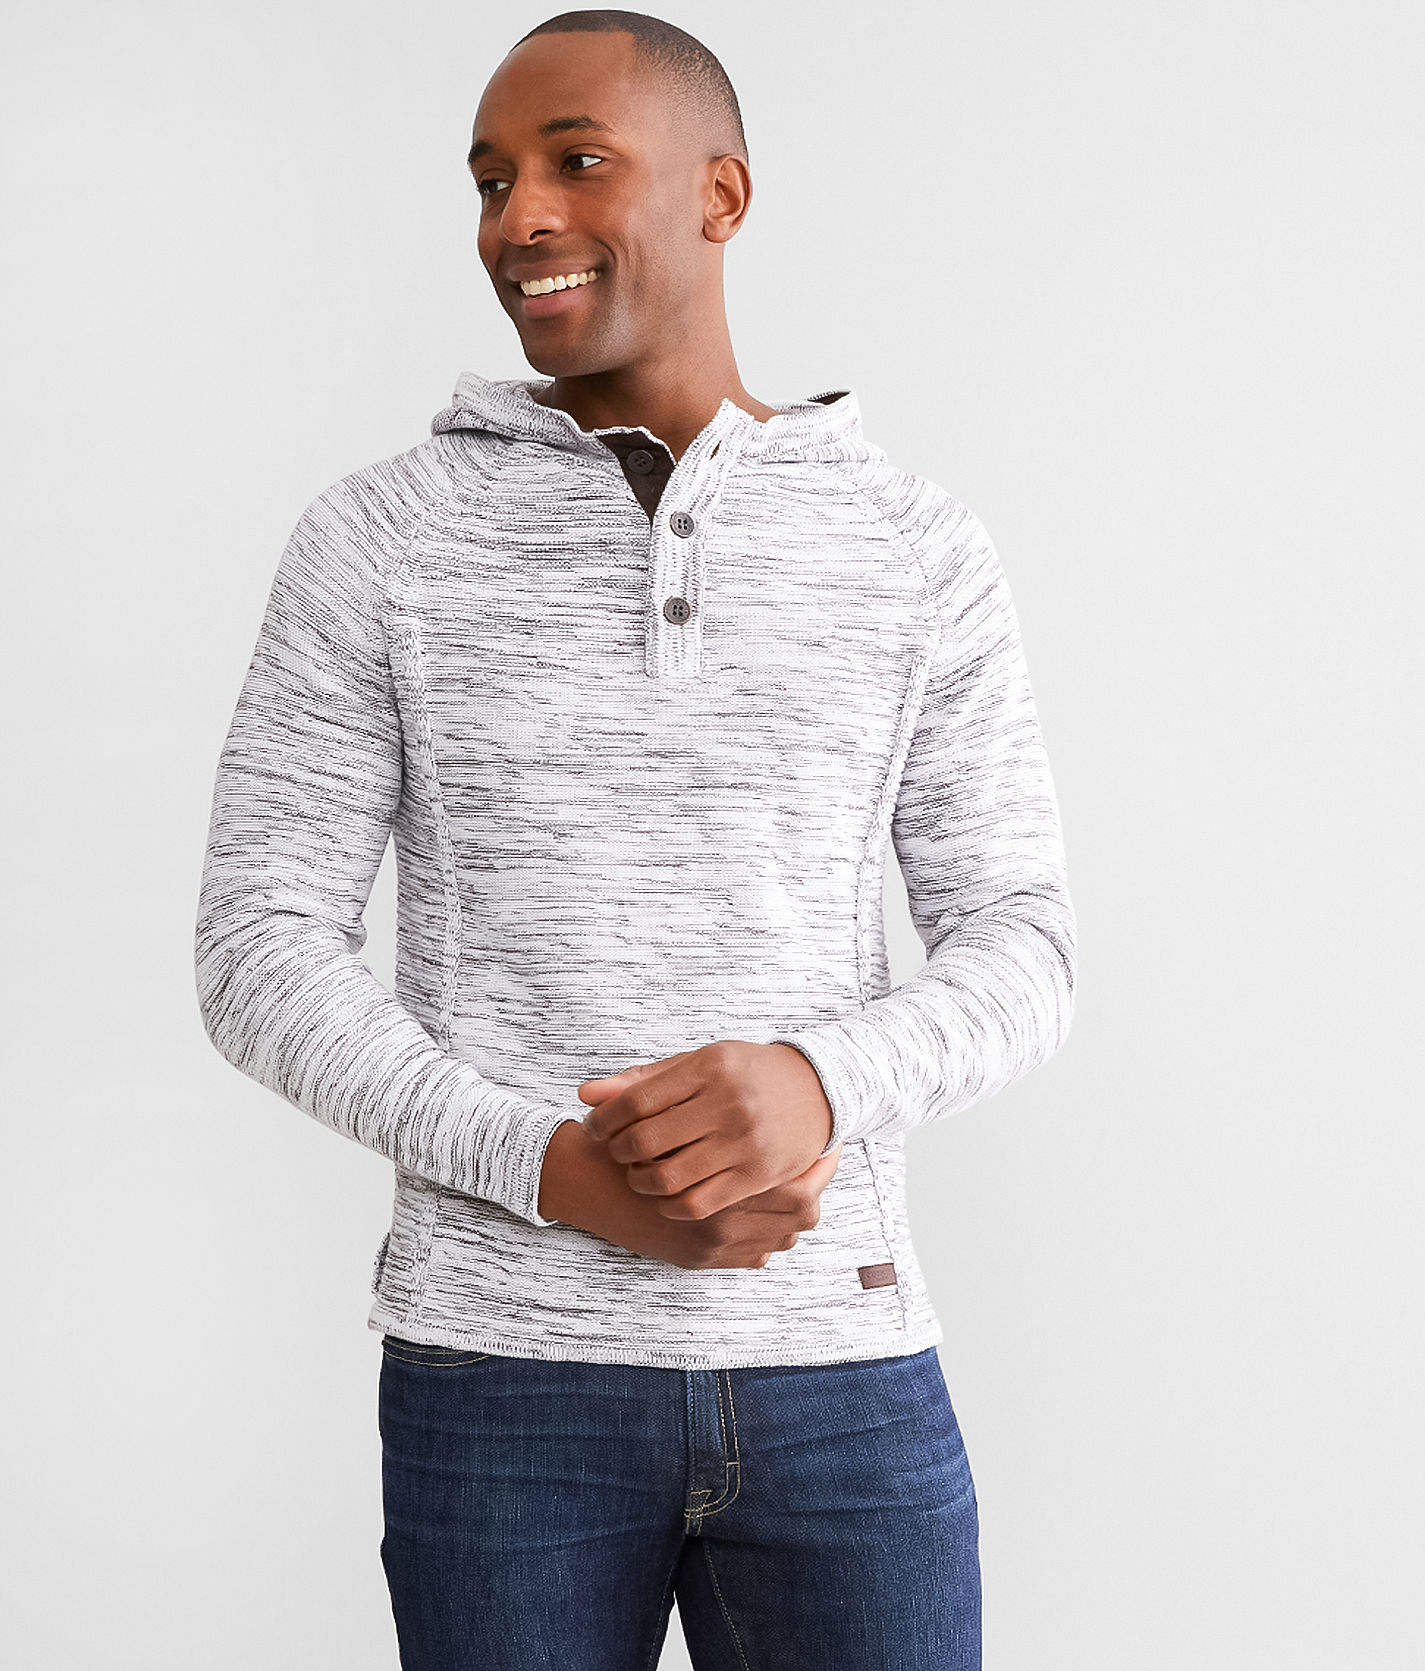 Outpost Makers Marled Henley Sweater - Men's Sweaters in White 